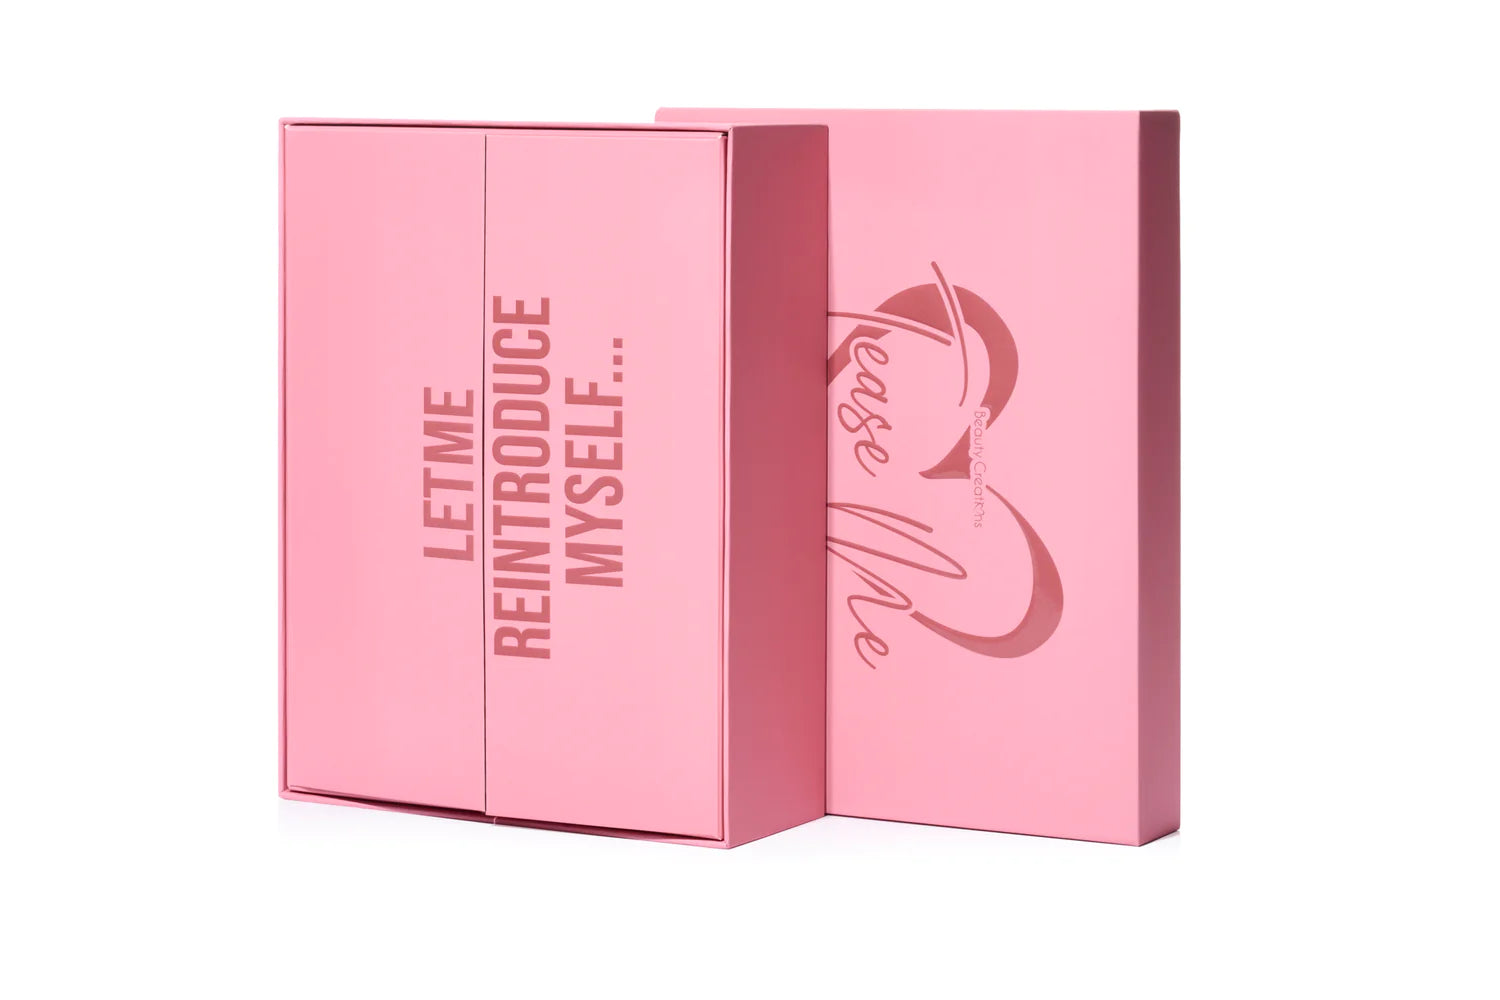 Beauty Creations - Tease Me Collection PR Box